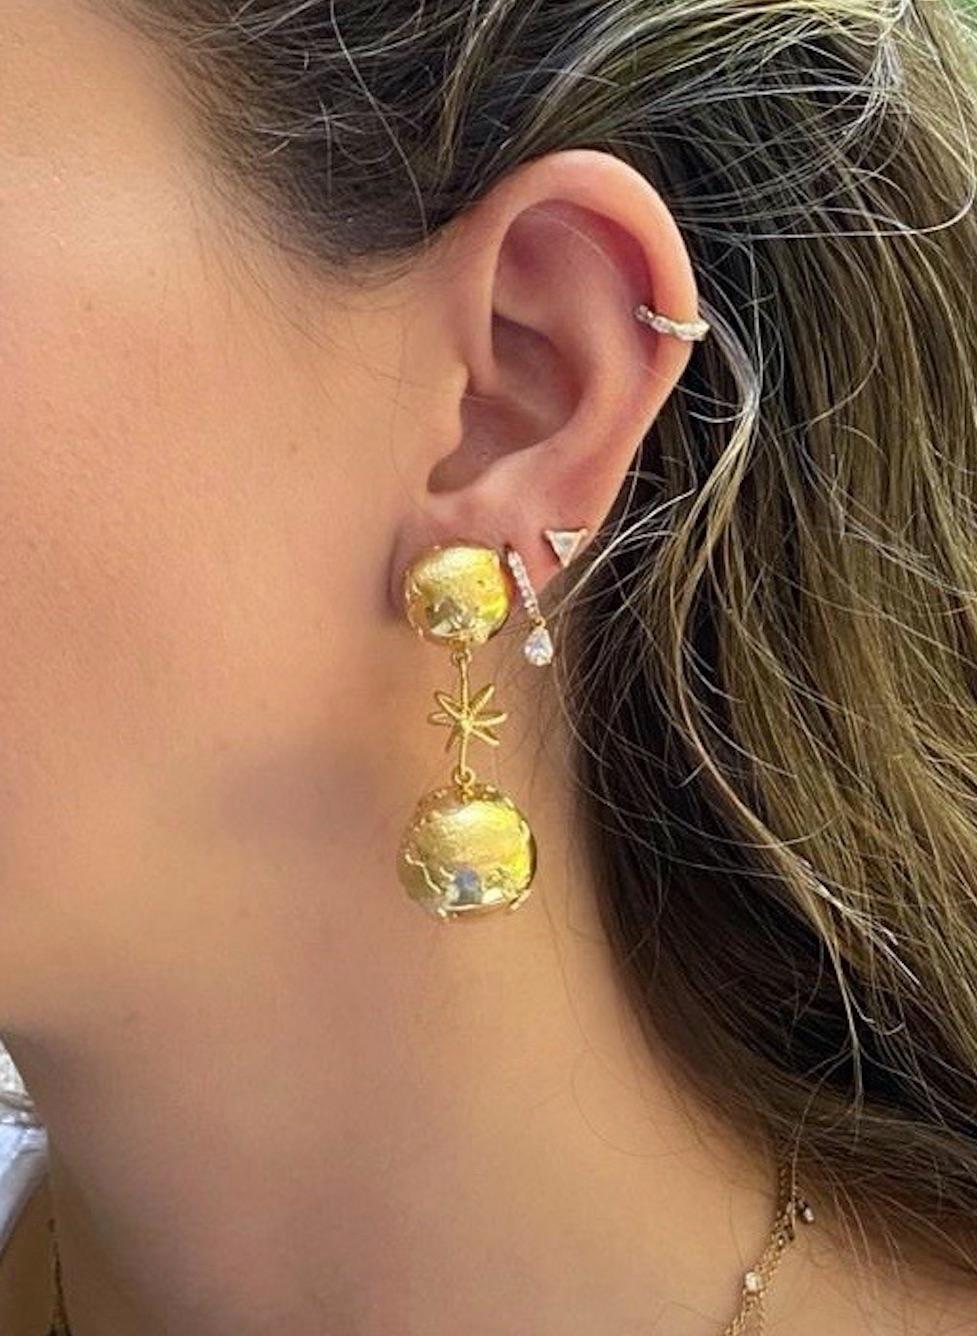 The Earth earrings are designed by Christina Alexiou. 

The Earth earrings are crafted with 18k yellow gold and handmade in Greece. 
The Earth is hollow, thus this pair of earrings is an easy to wear everyday piece of jewelry. This piece features